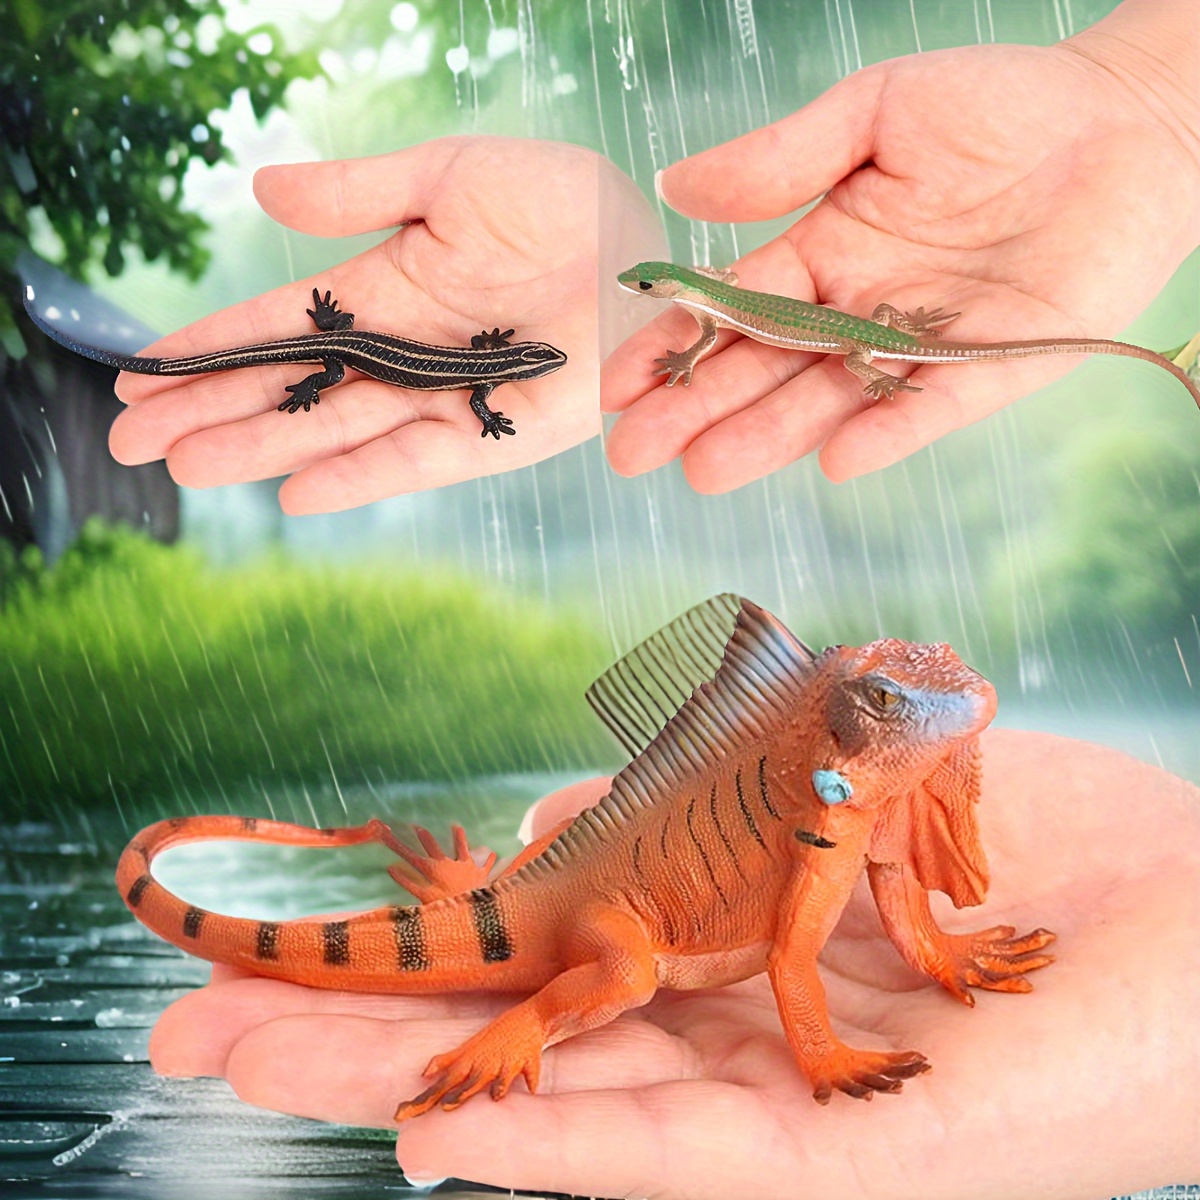 

Handcrafted Realistic Lizard Figurine - Perfect For Office, Desk, Garden & Bonsai Decor | Ideal For Christmas & Holiday Parties